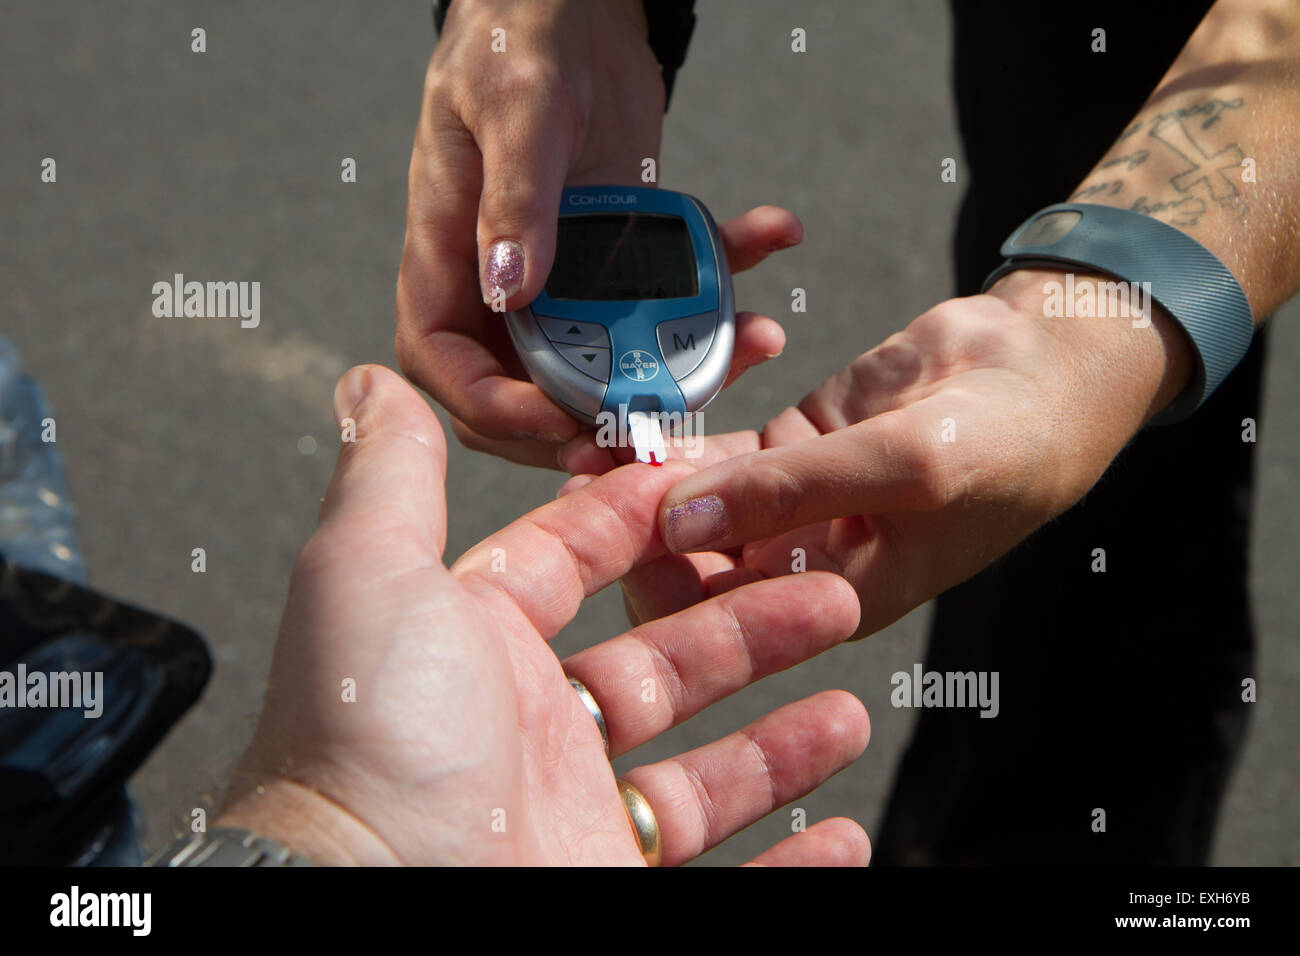 EMT / Paramedic administers blood sugar test in ambulance. Stock Photo